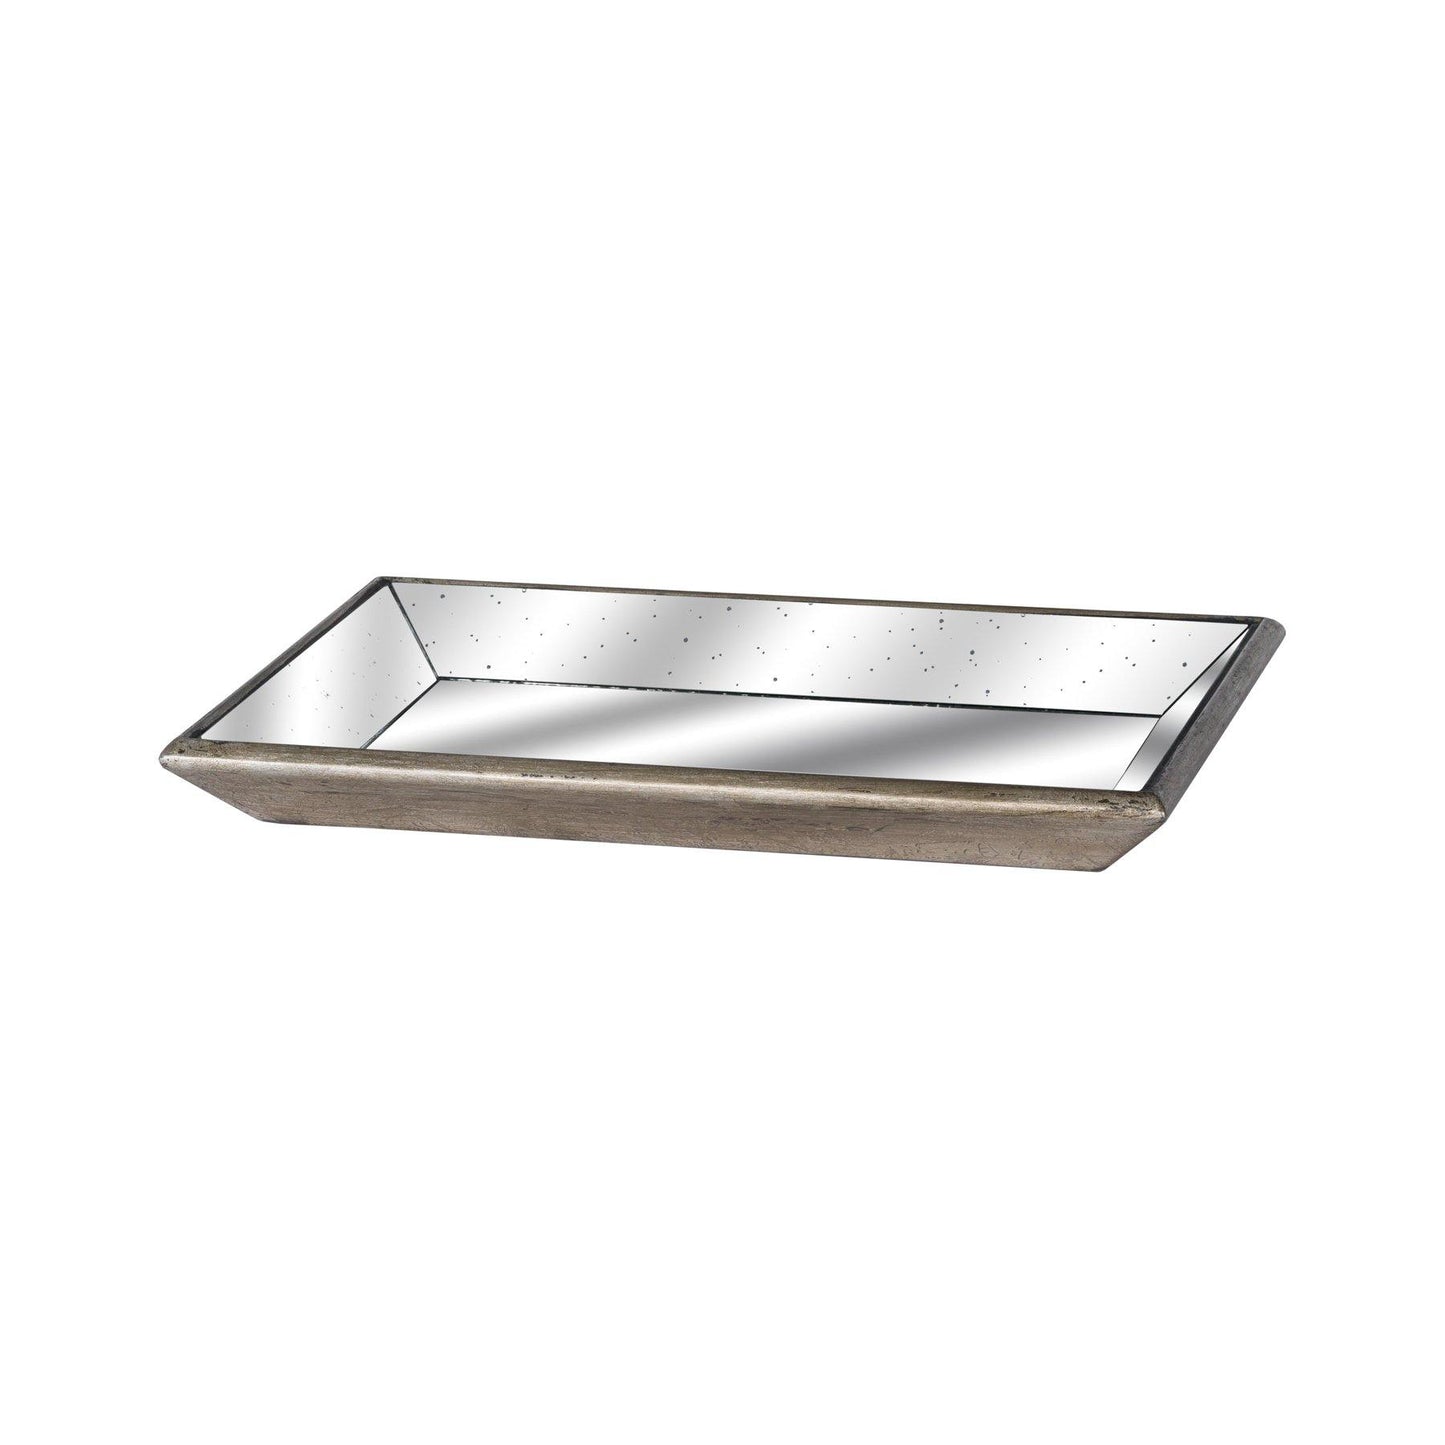 Astor Distressed Mirrored Tray With Wooden Detailing | L J Home